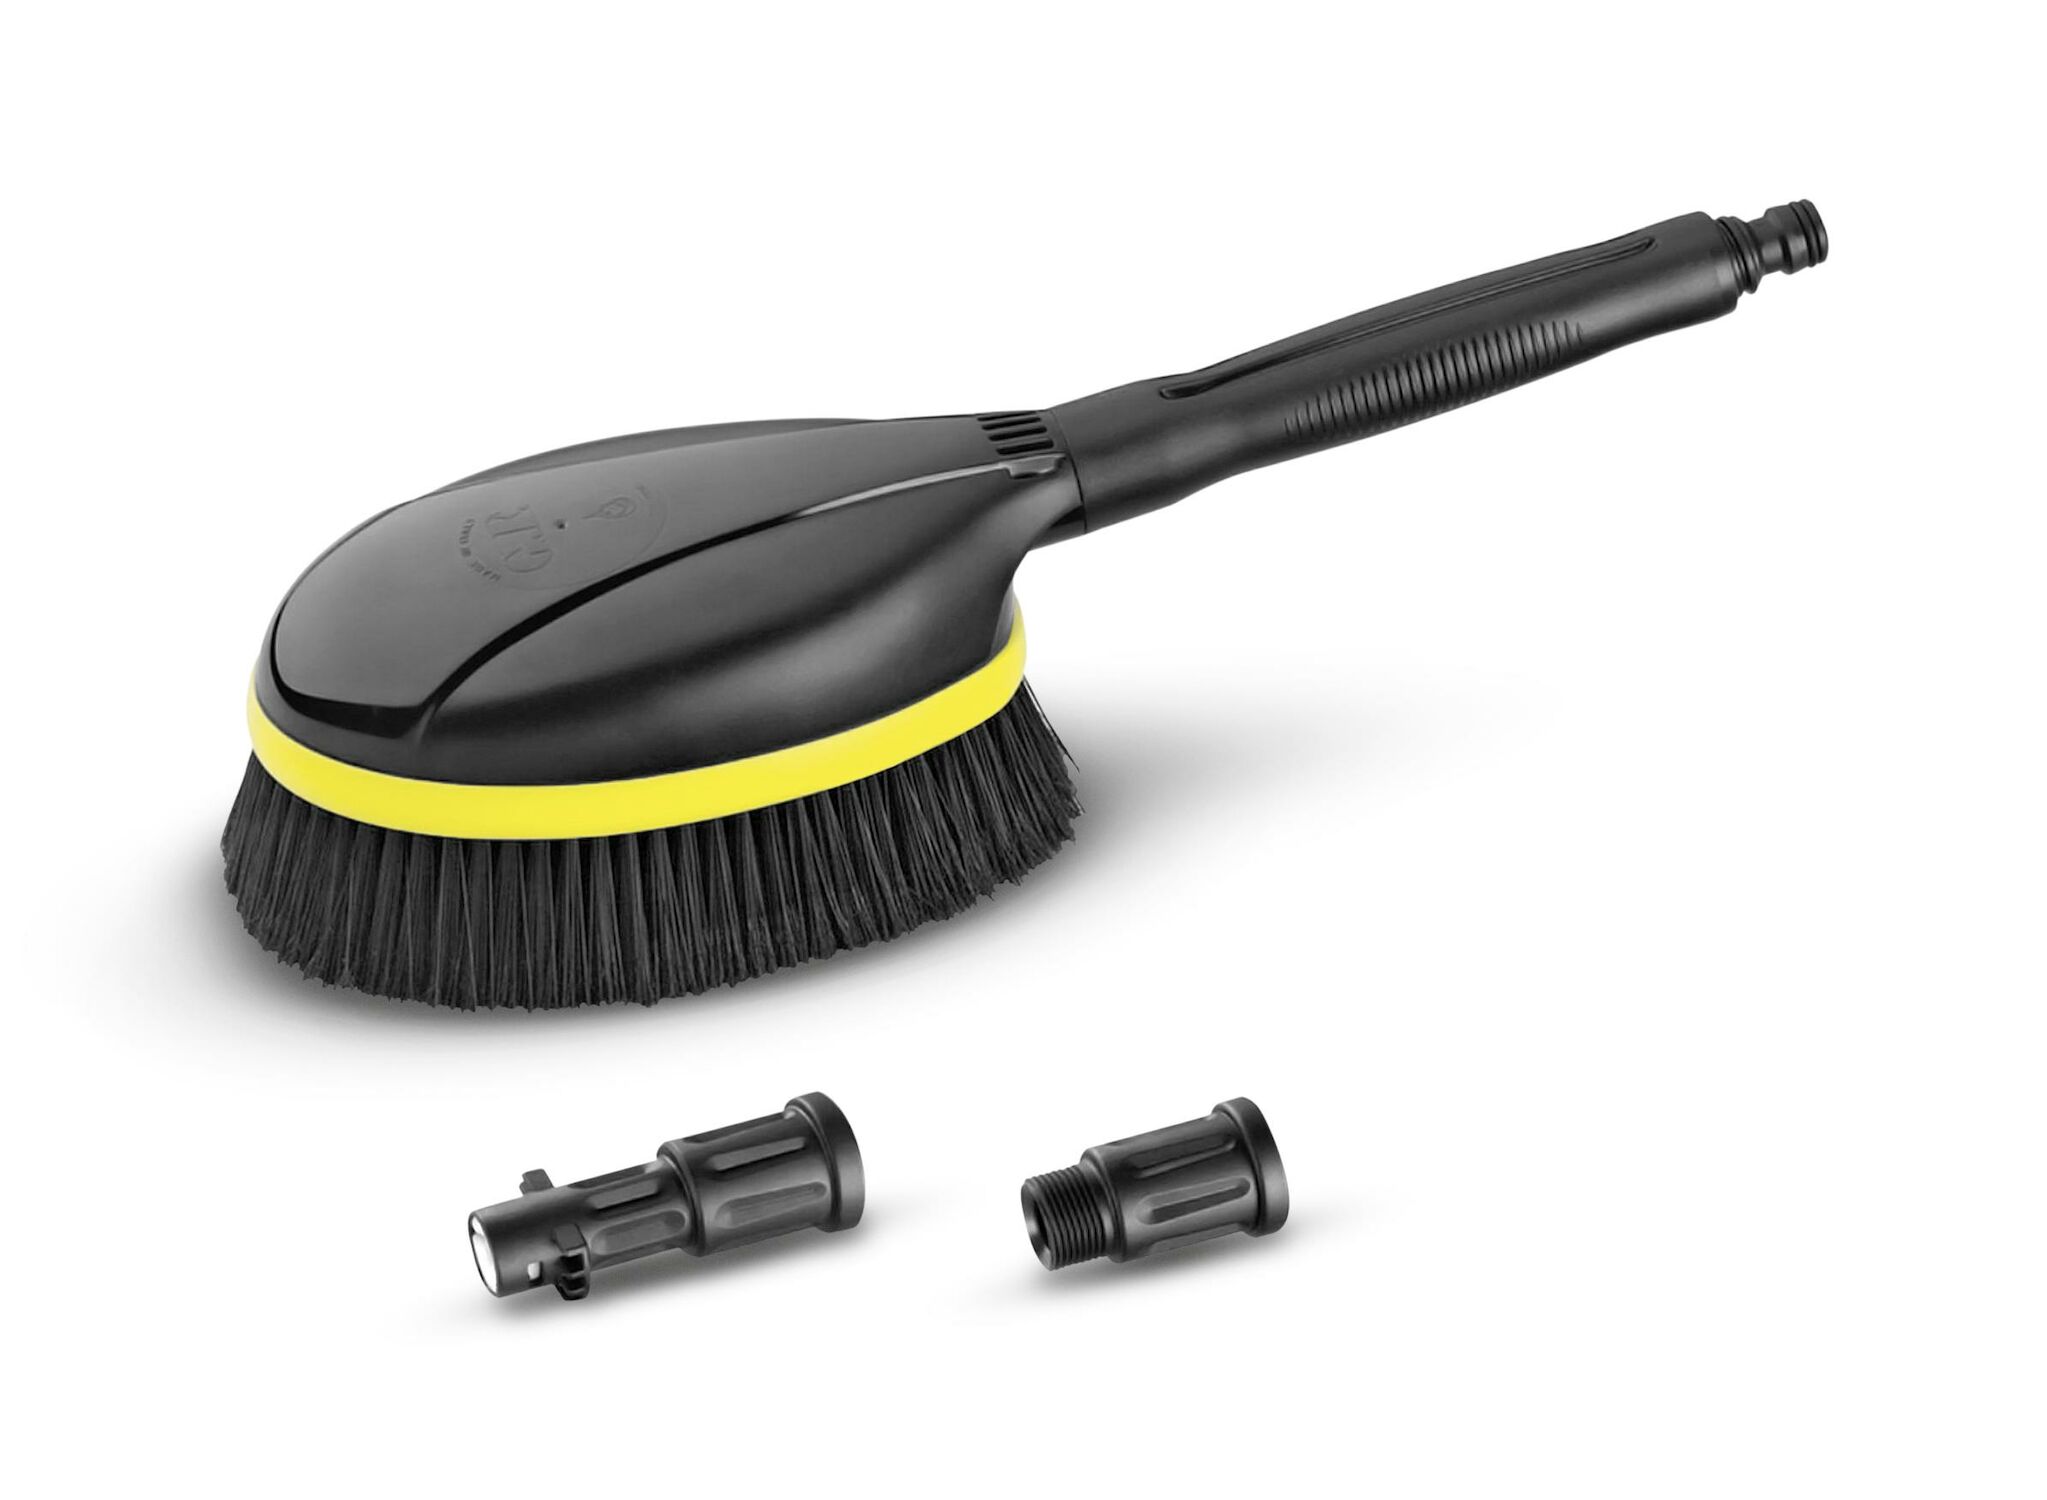 Use the Water Flow from Your Pressure Washer to Drive the Bristles on this Handy Rotating Wash Brush